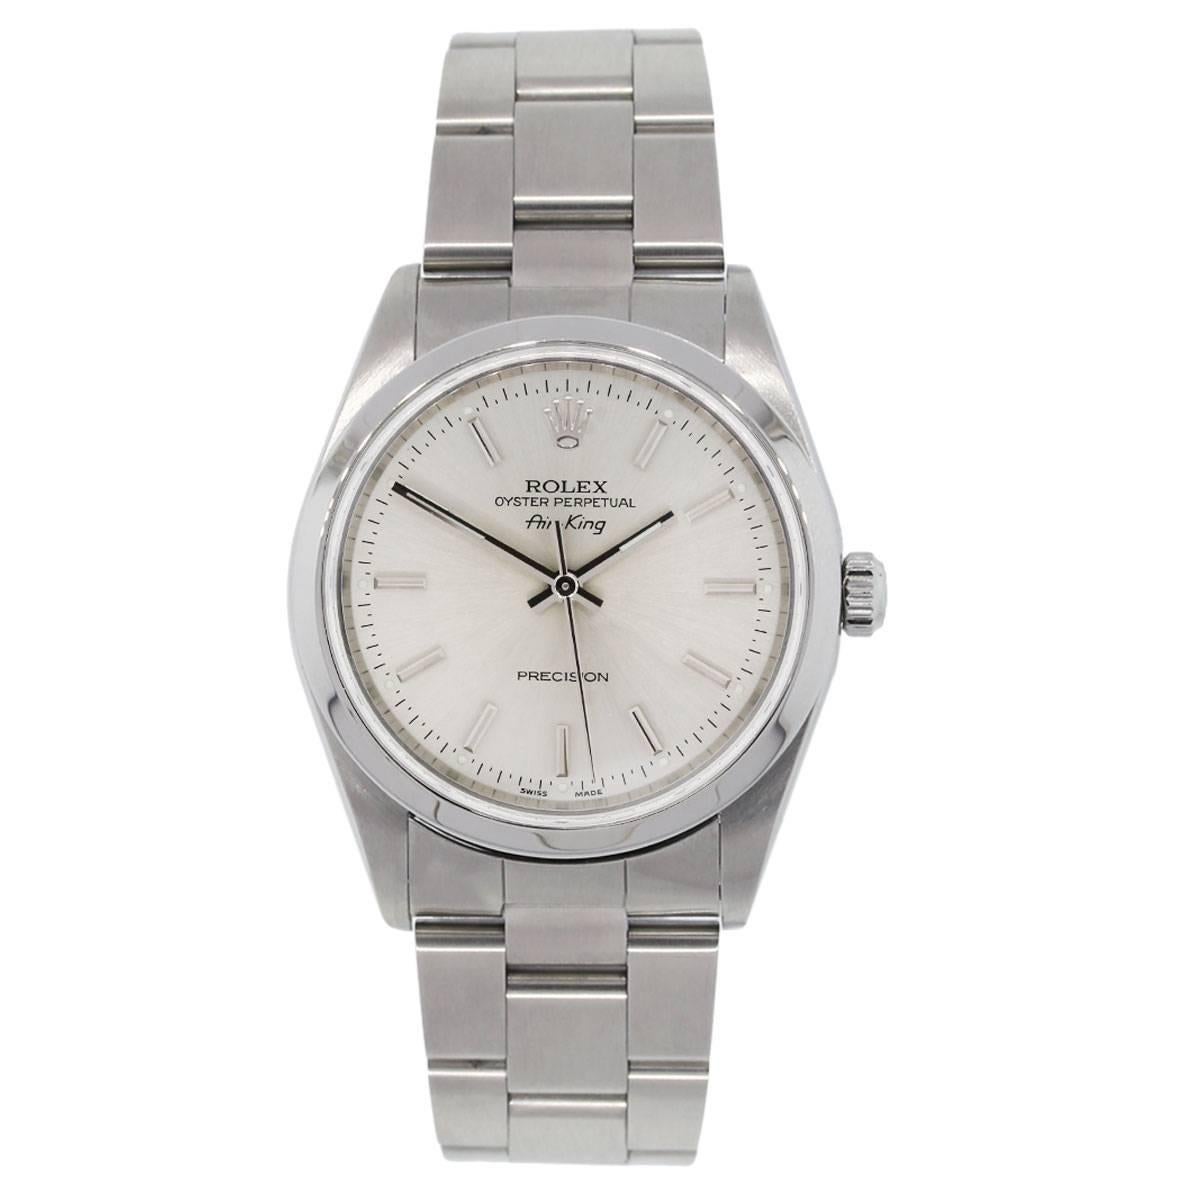 Brand: Rolex
Model: Airking
Reference Number: 14000
Serial: "A" serial
Case Material: Stainless steel
Dial: Silvered stick dial with silver hands
Bezel: Smooth stainless steel fixed bezel
Case Measurements: 34mm
Bracelet: Stainless steel